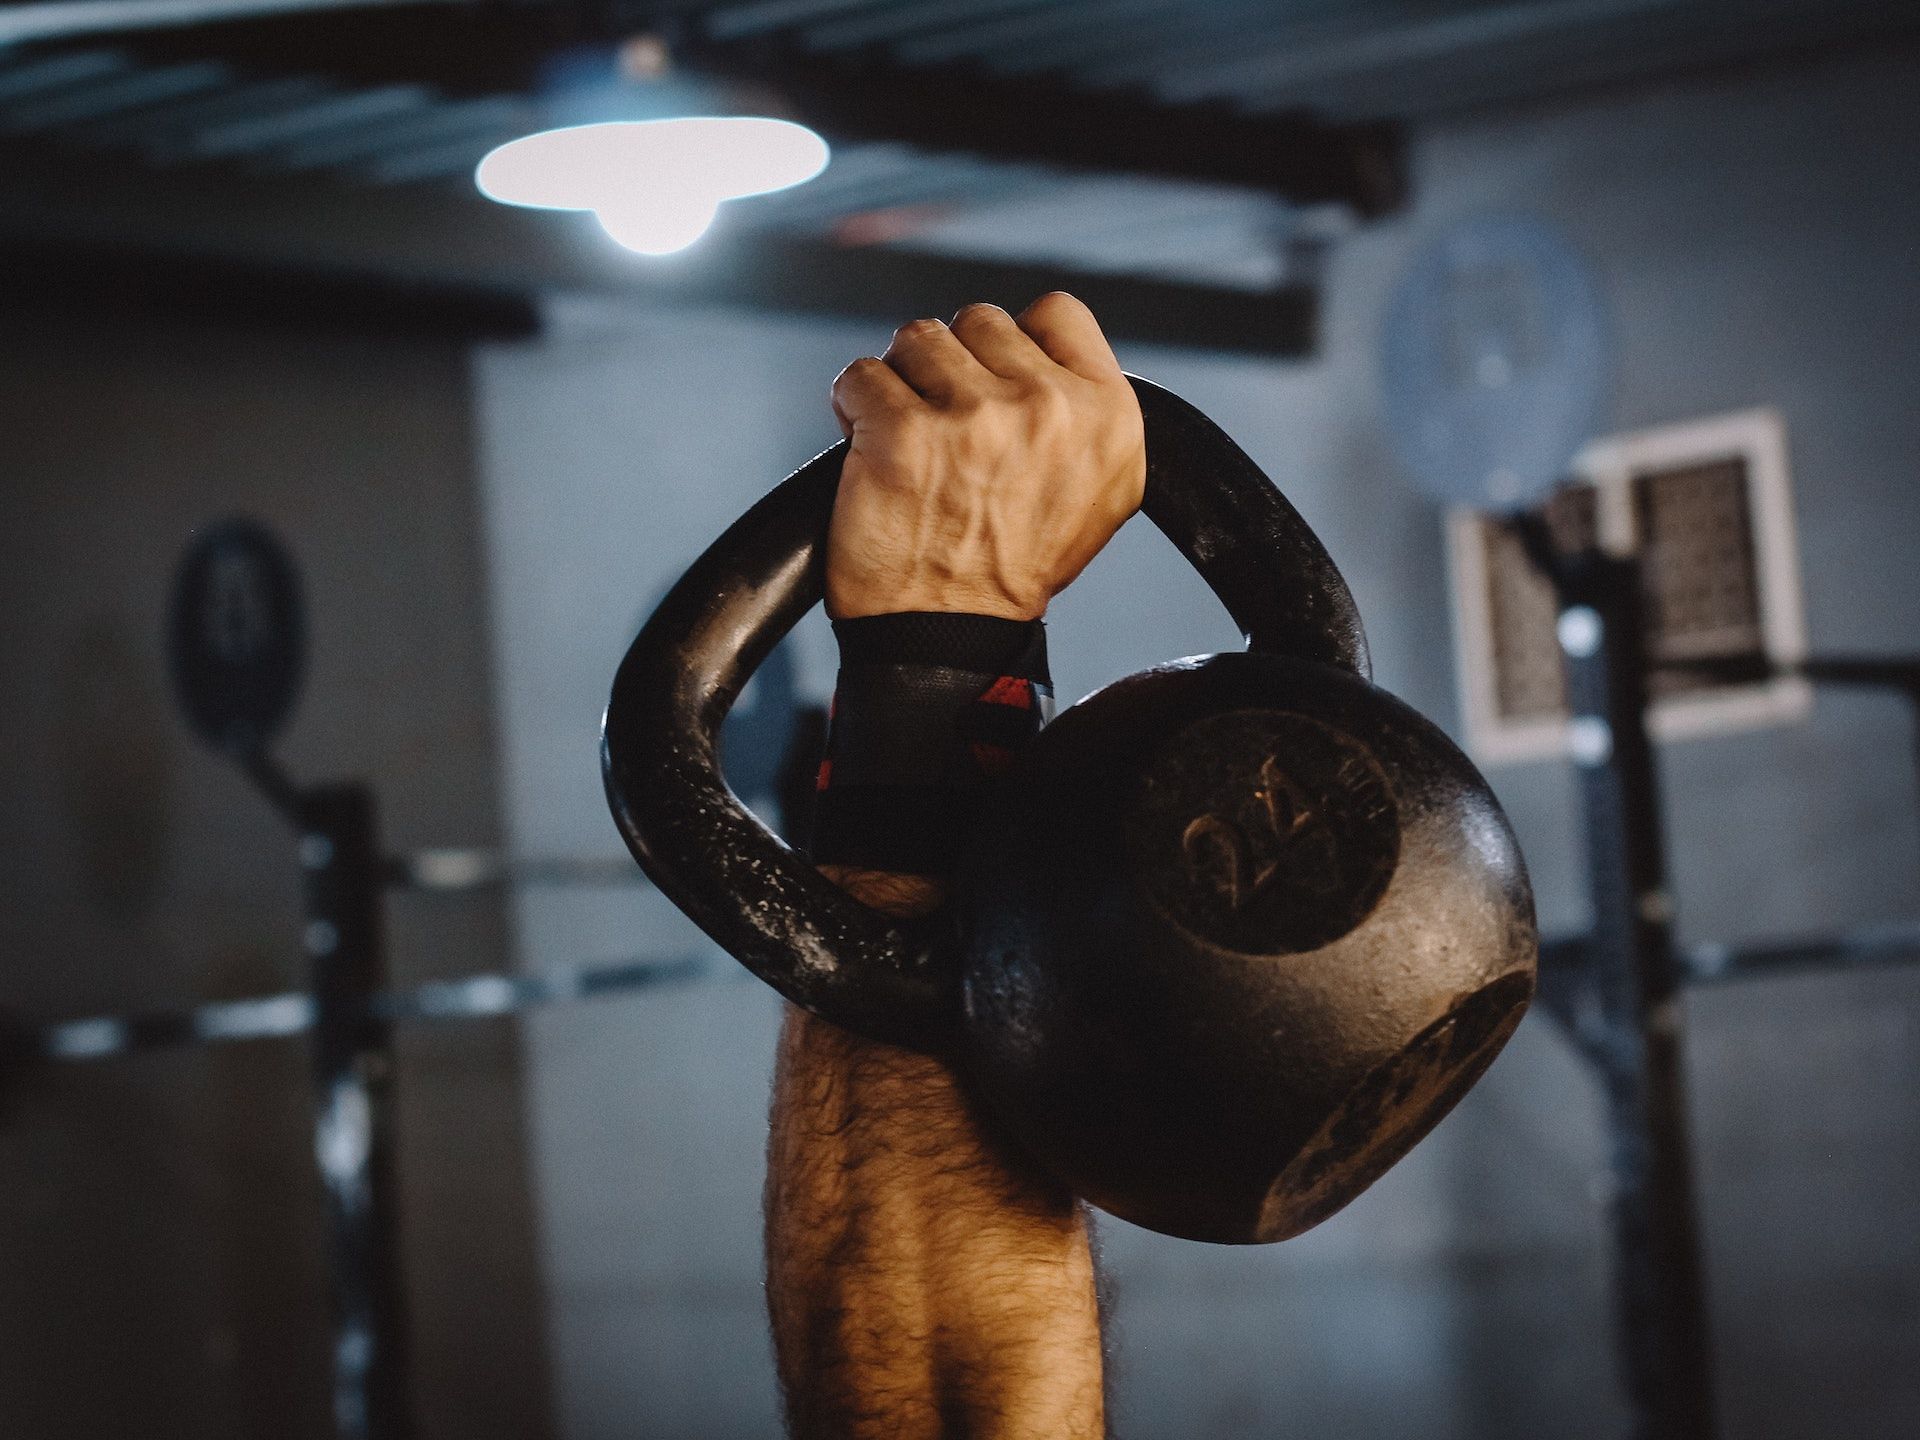 Kettlebell exercises offer weight loss benefits. (Photo via Pexels/Geancarlo Peruzzolo)